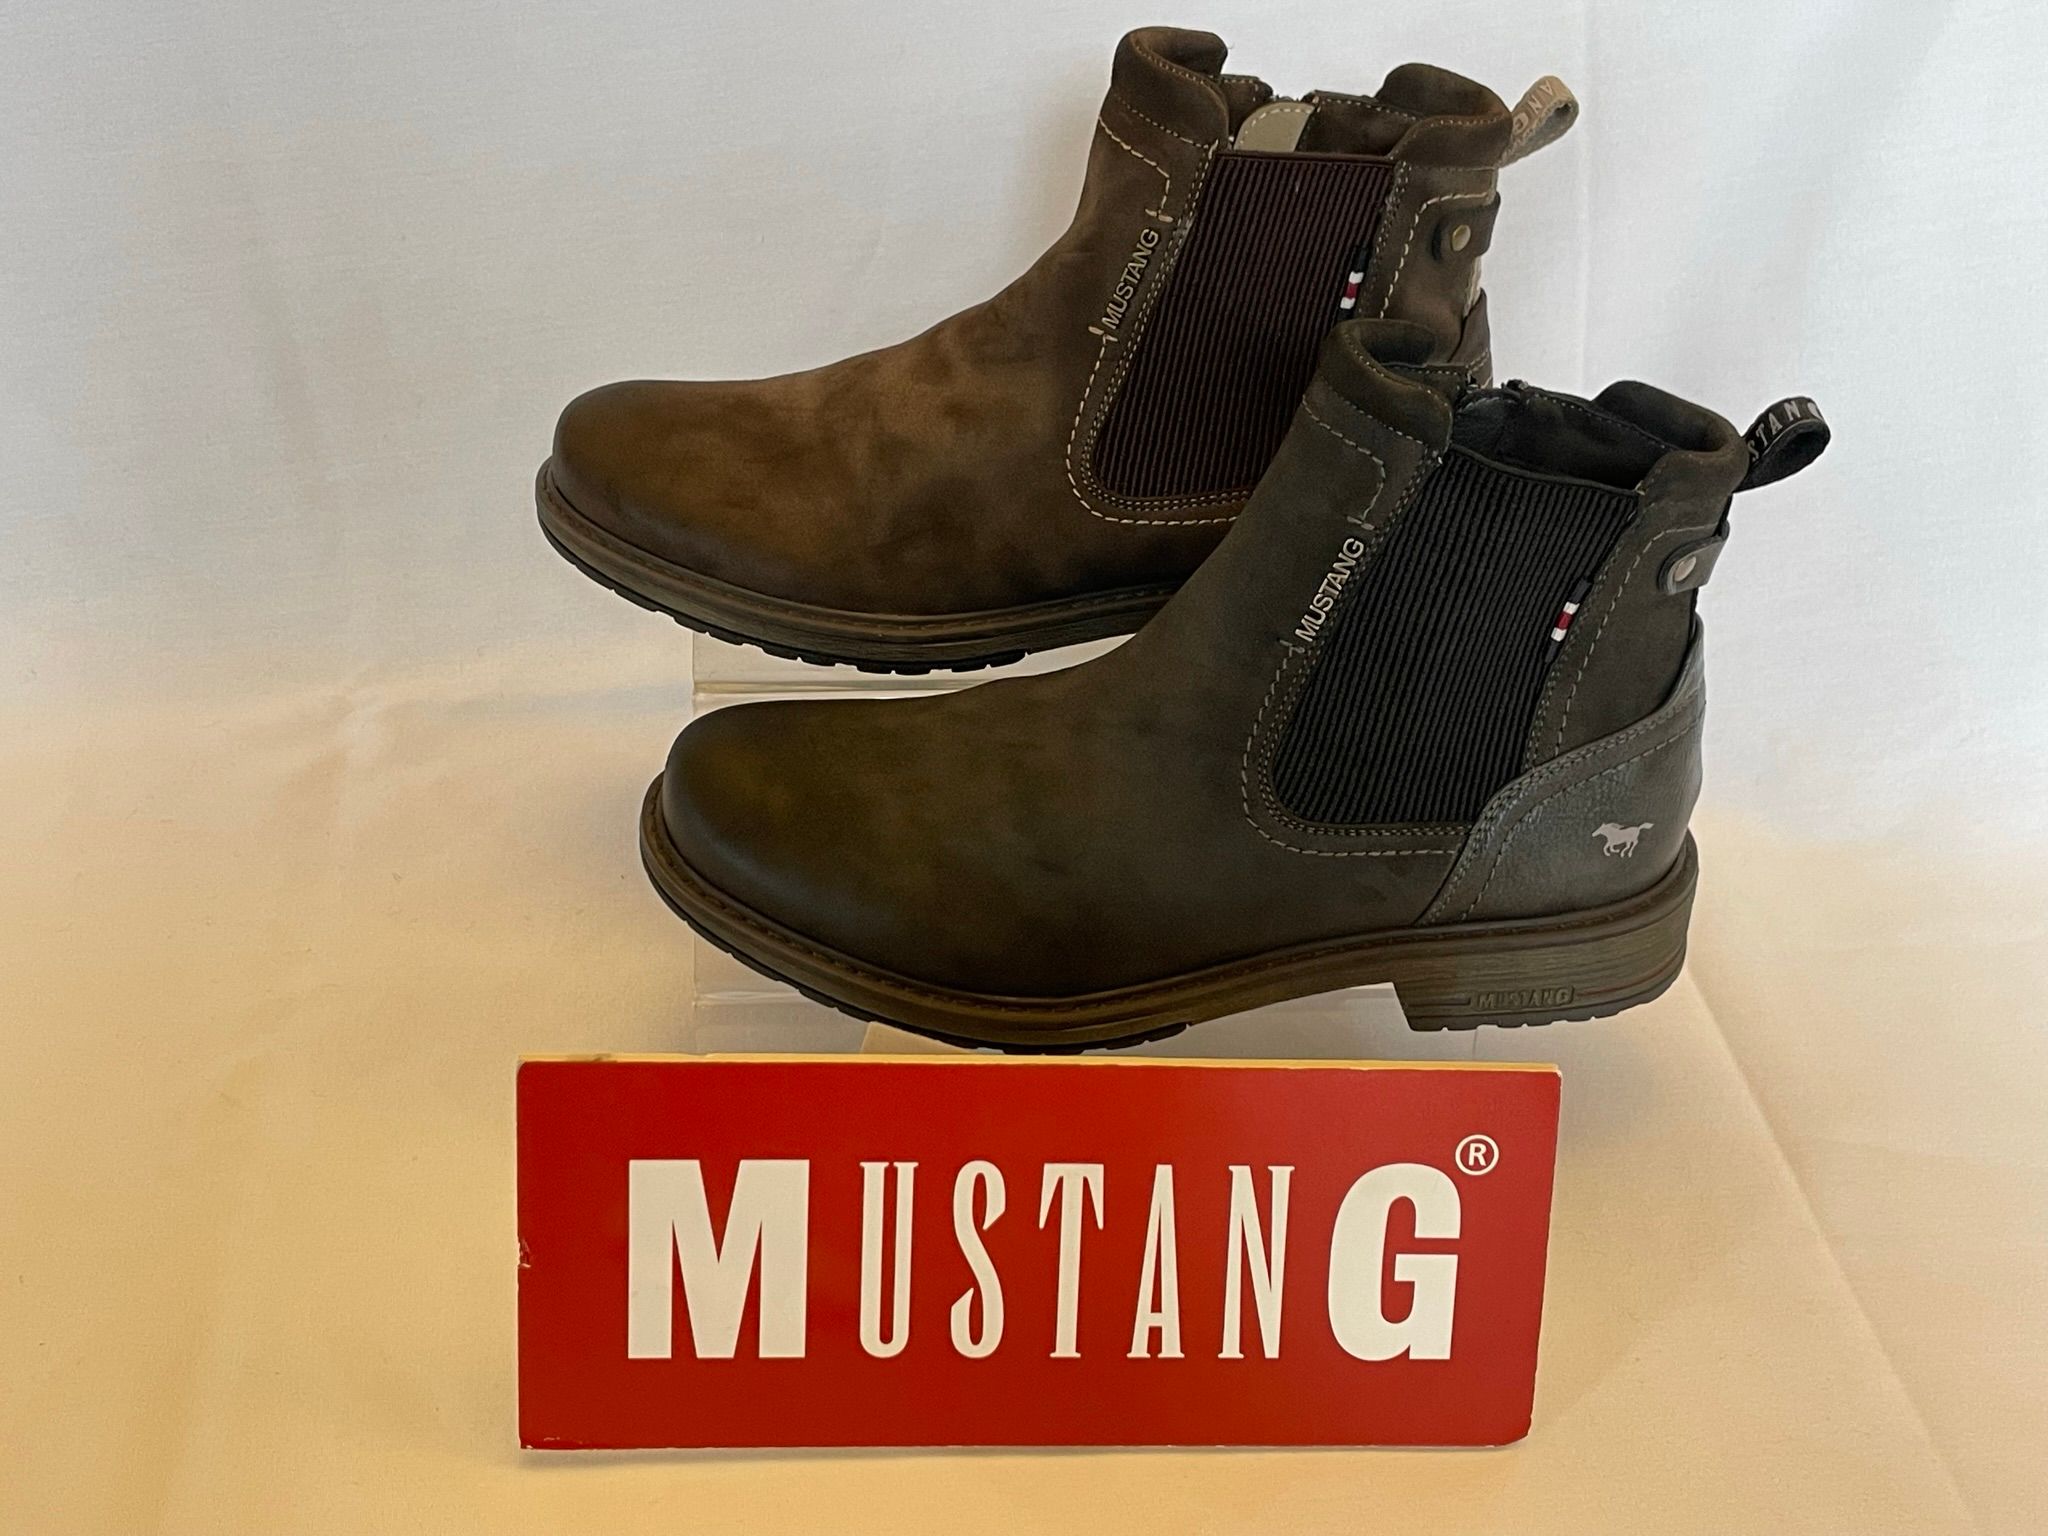 Mustang Shoes